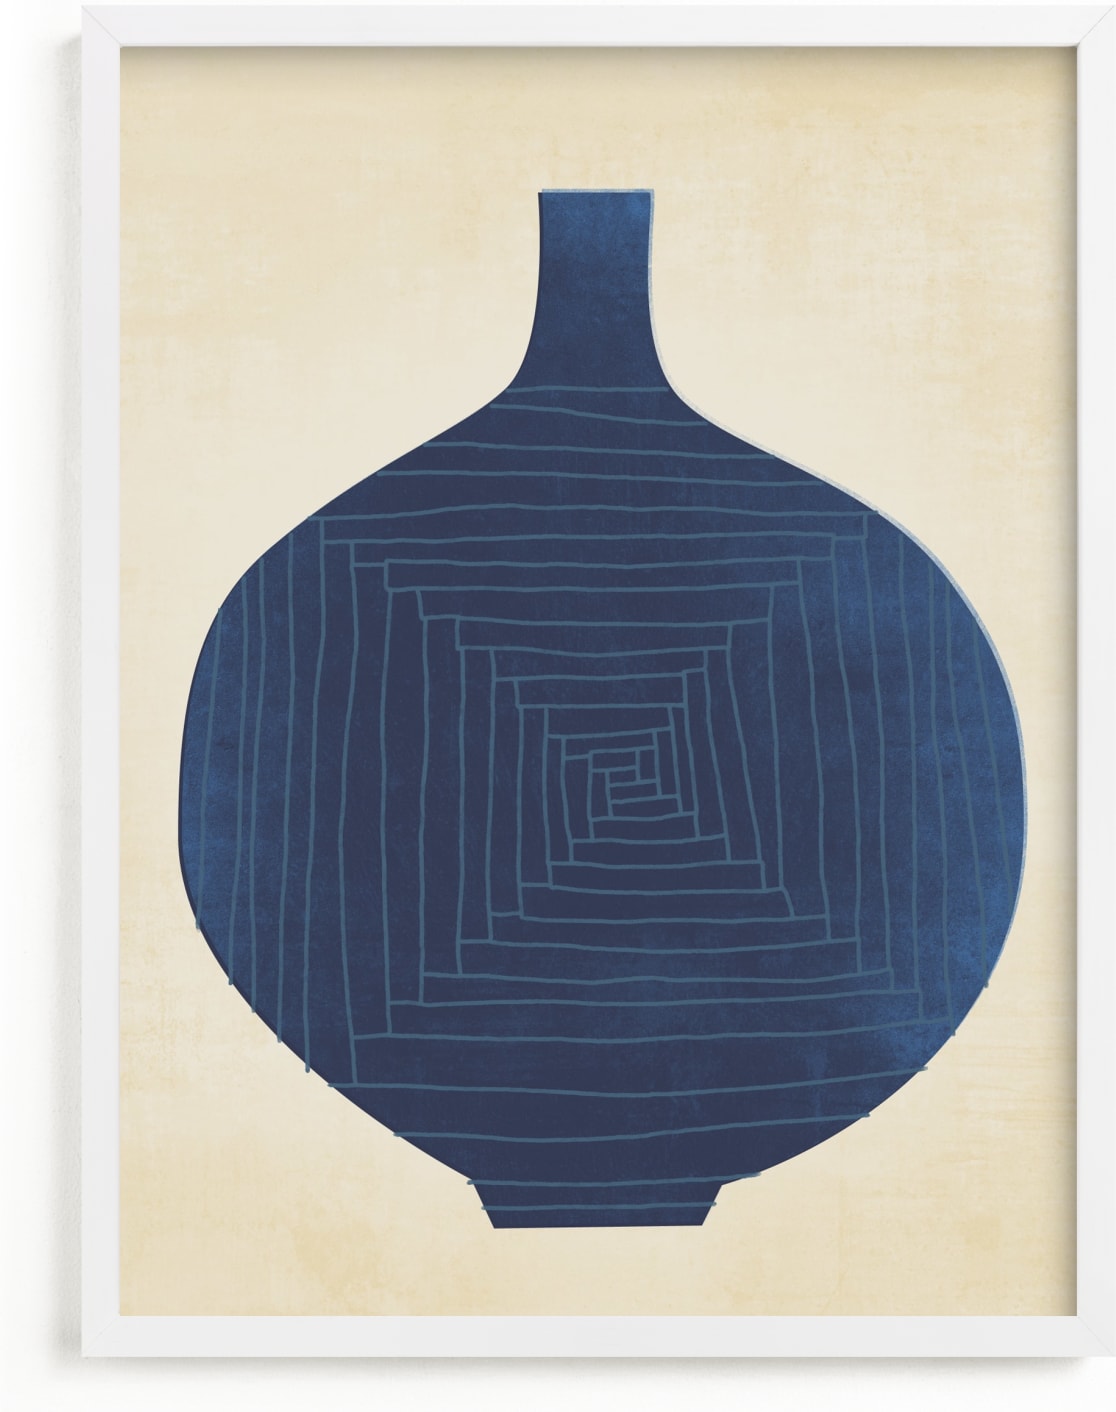 This is a blue art by Tiny Type Studios called Vase Study in Blue.